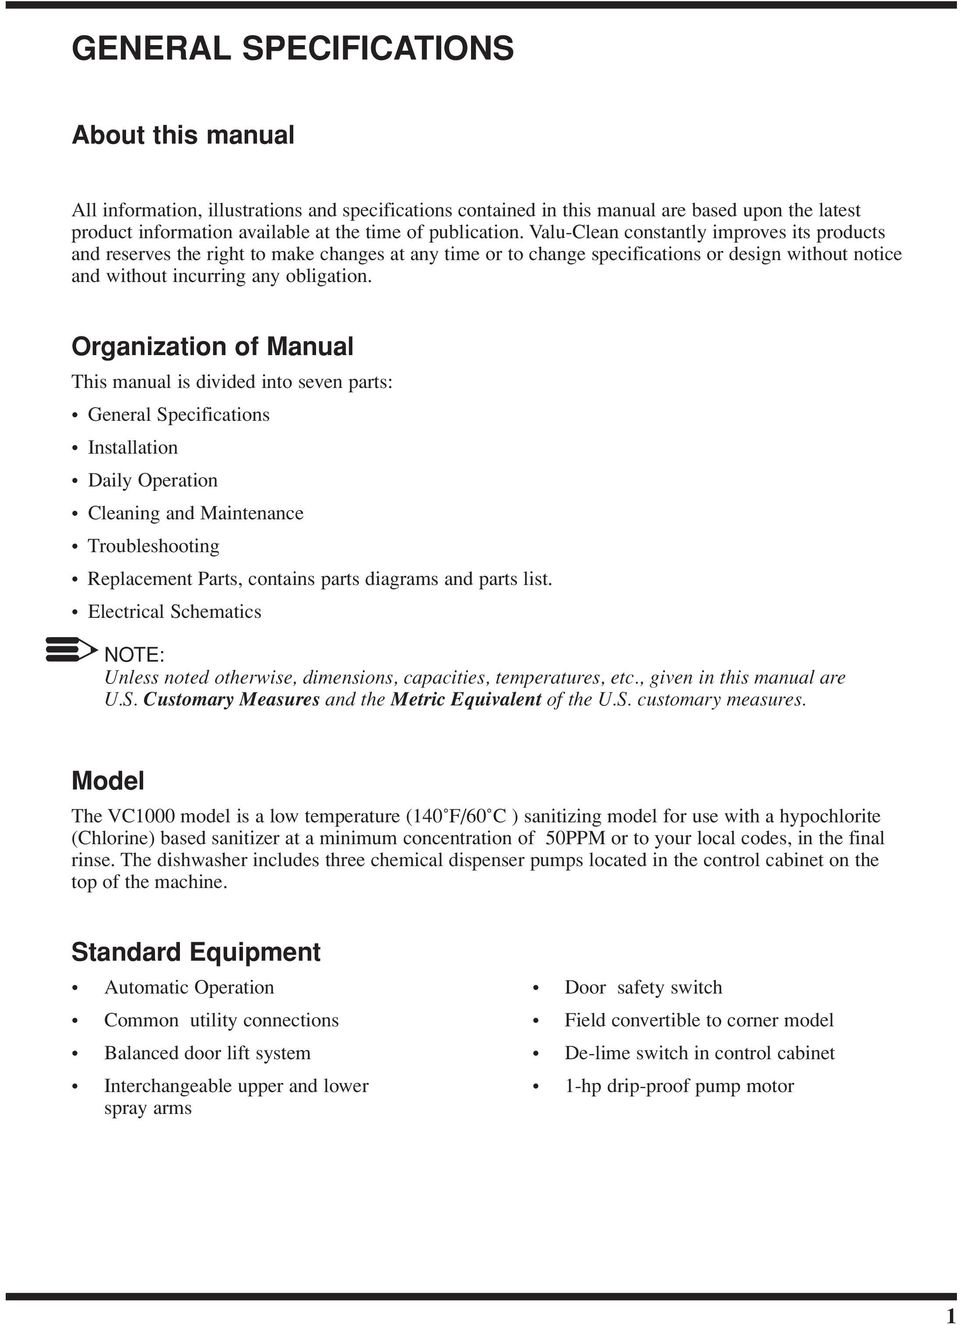 Organization of Manual This manual is divided into seven parts: General Specifications Installation Daily Operation Cleaning and Maintenance Troubleshooting Replacement Parts, contains parts diagrams